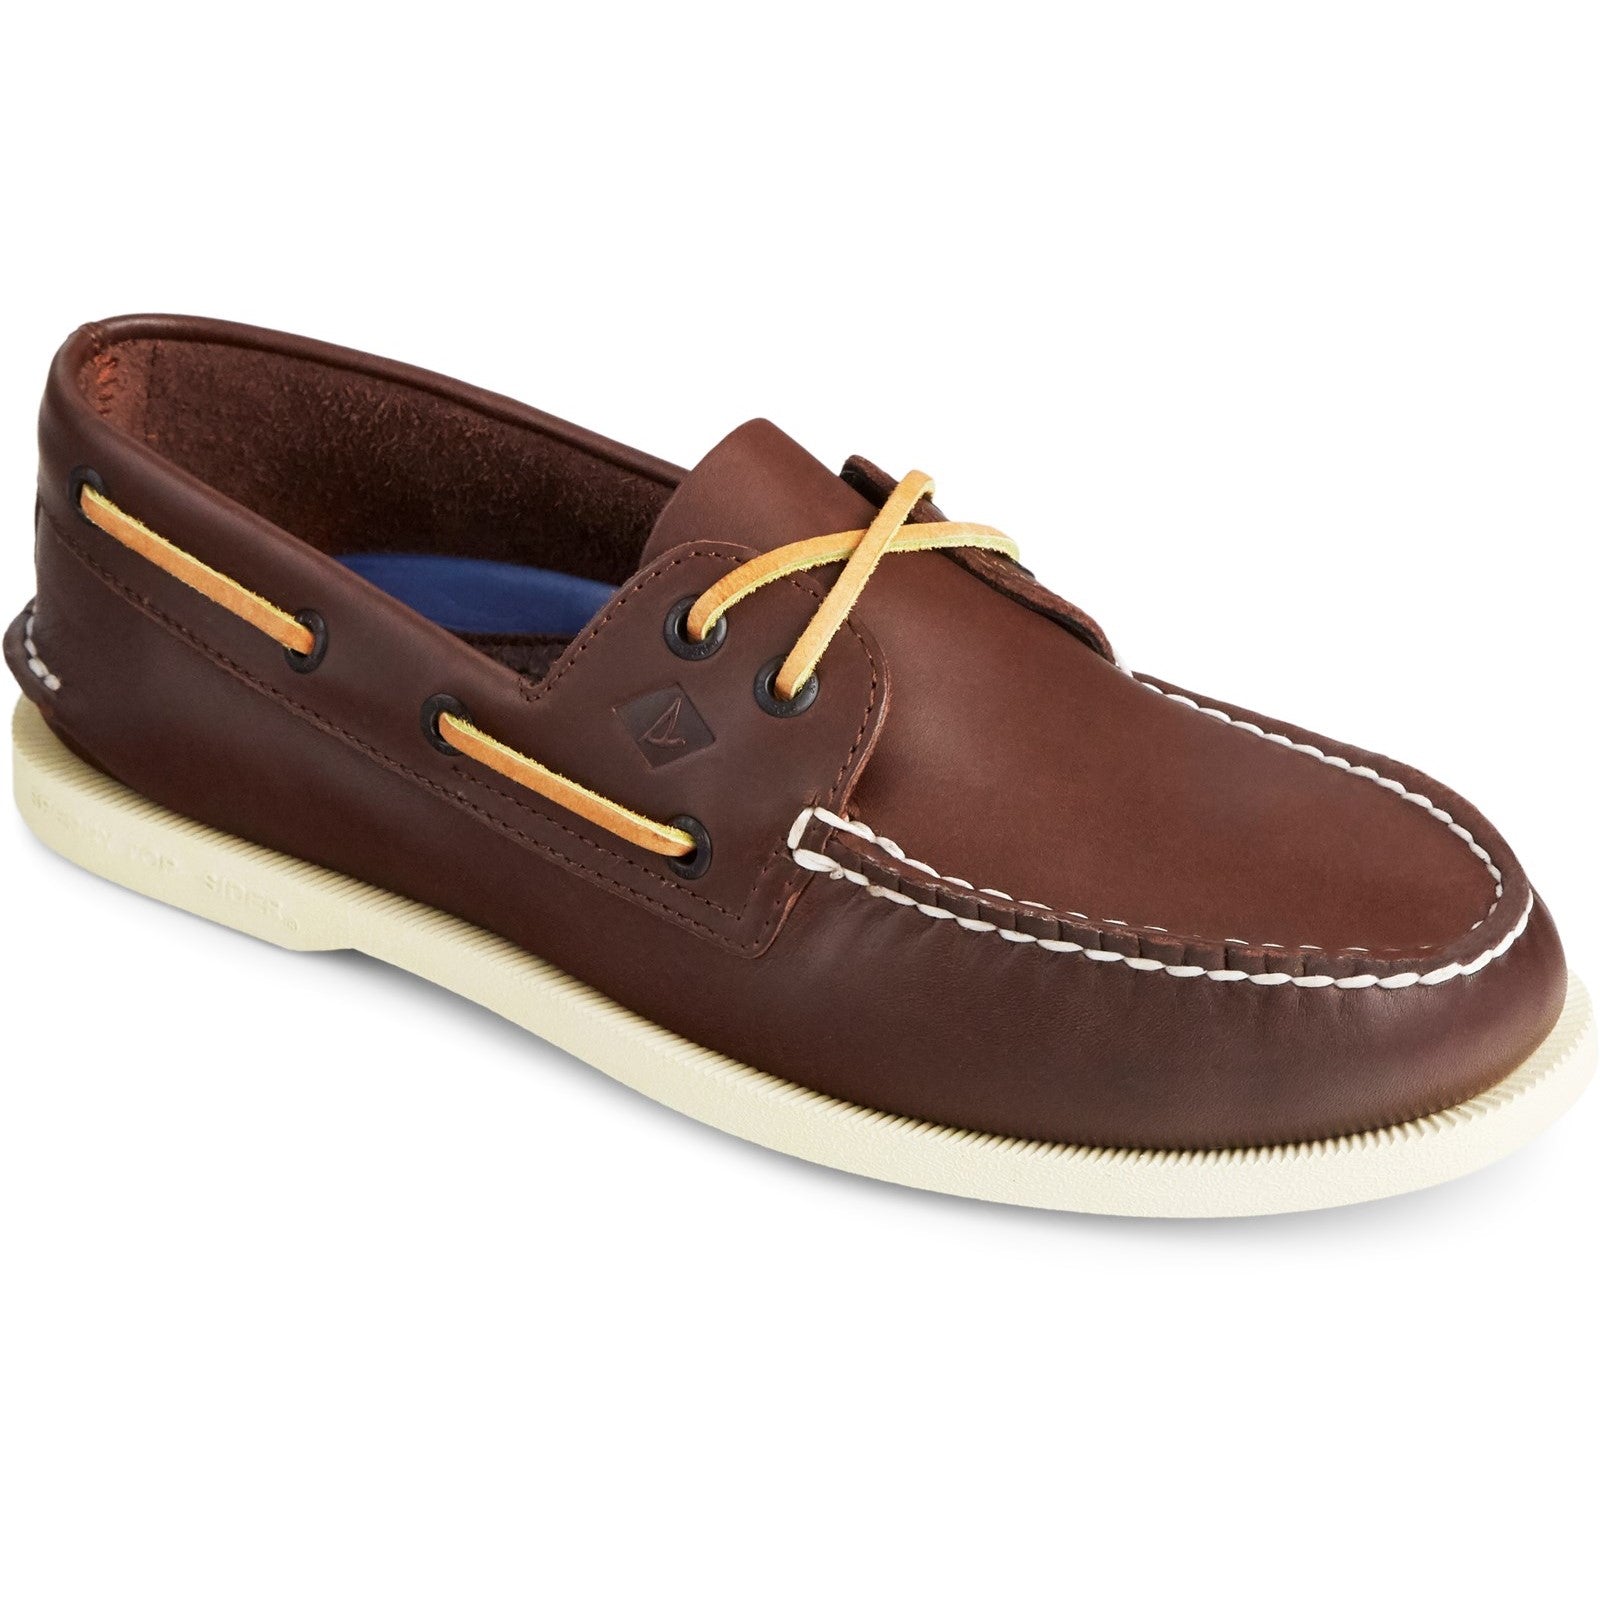 Sperry Mens Authentic Original Leather Boat Shoes - Brown